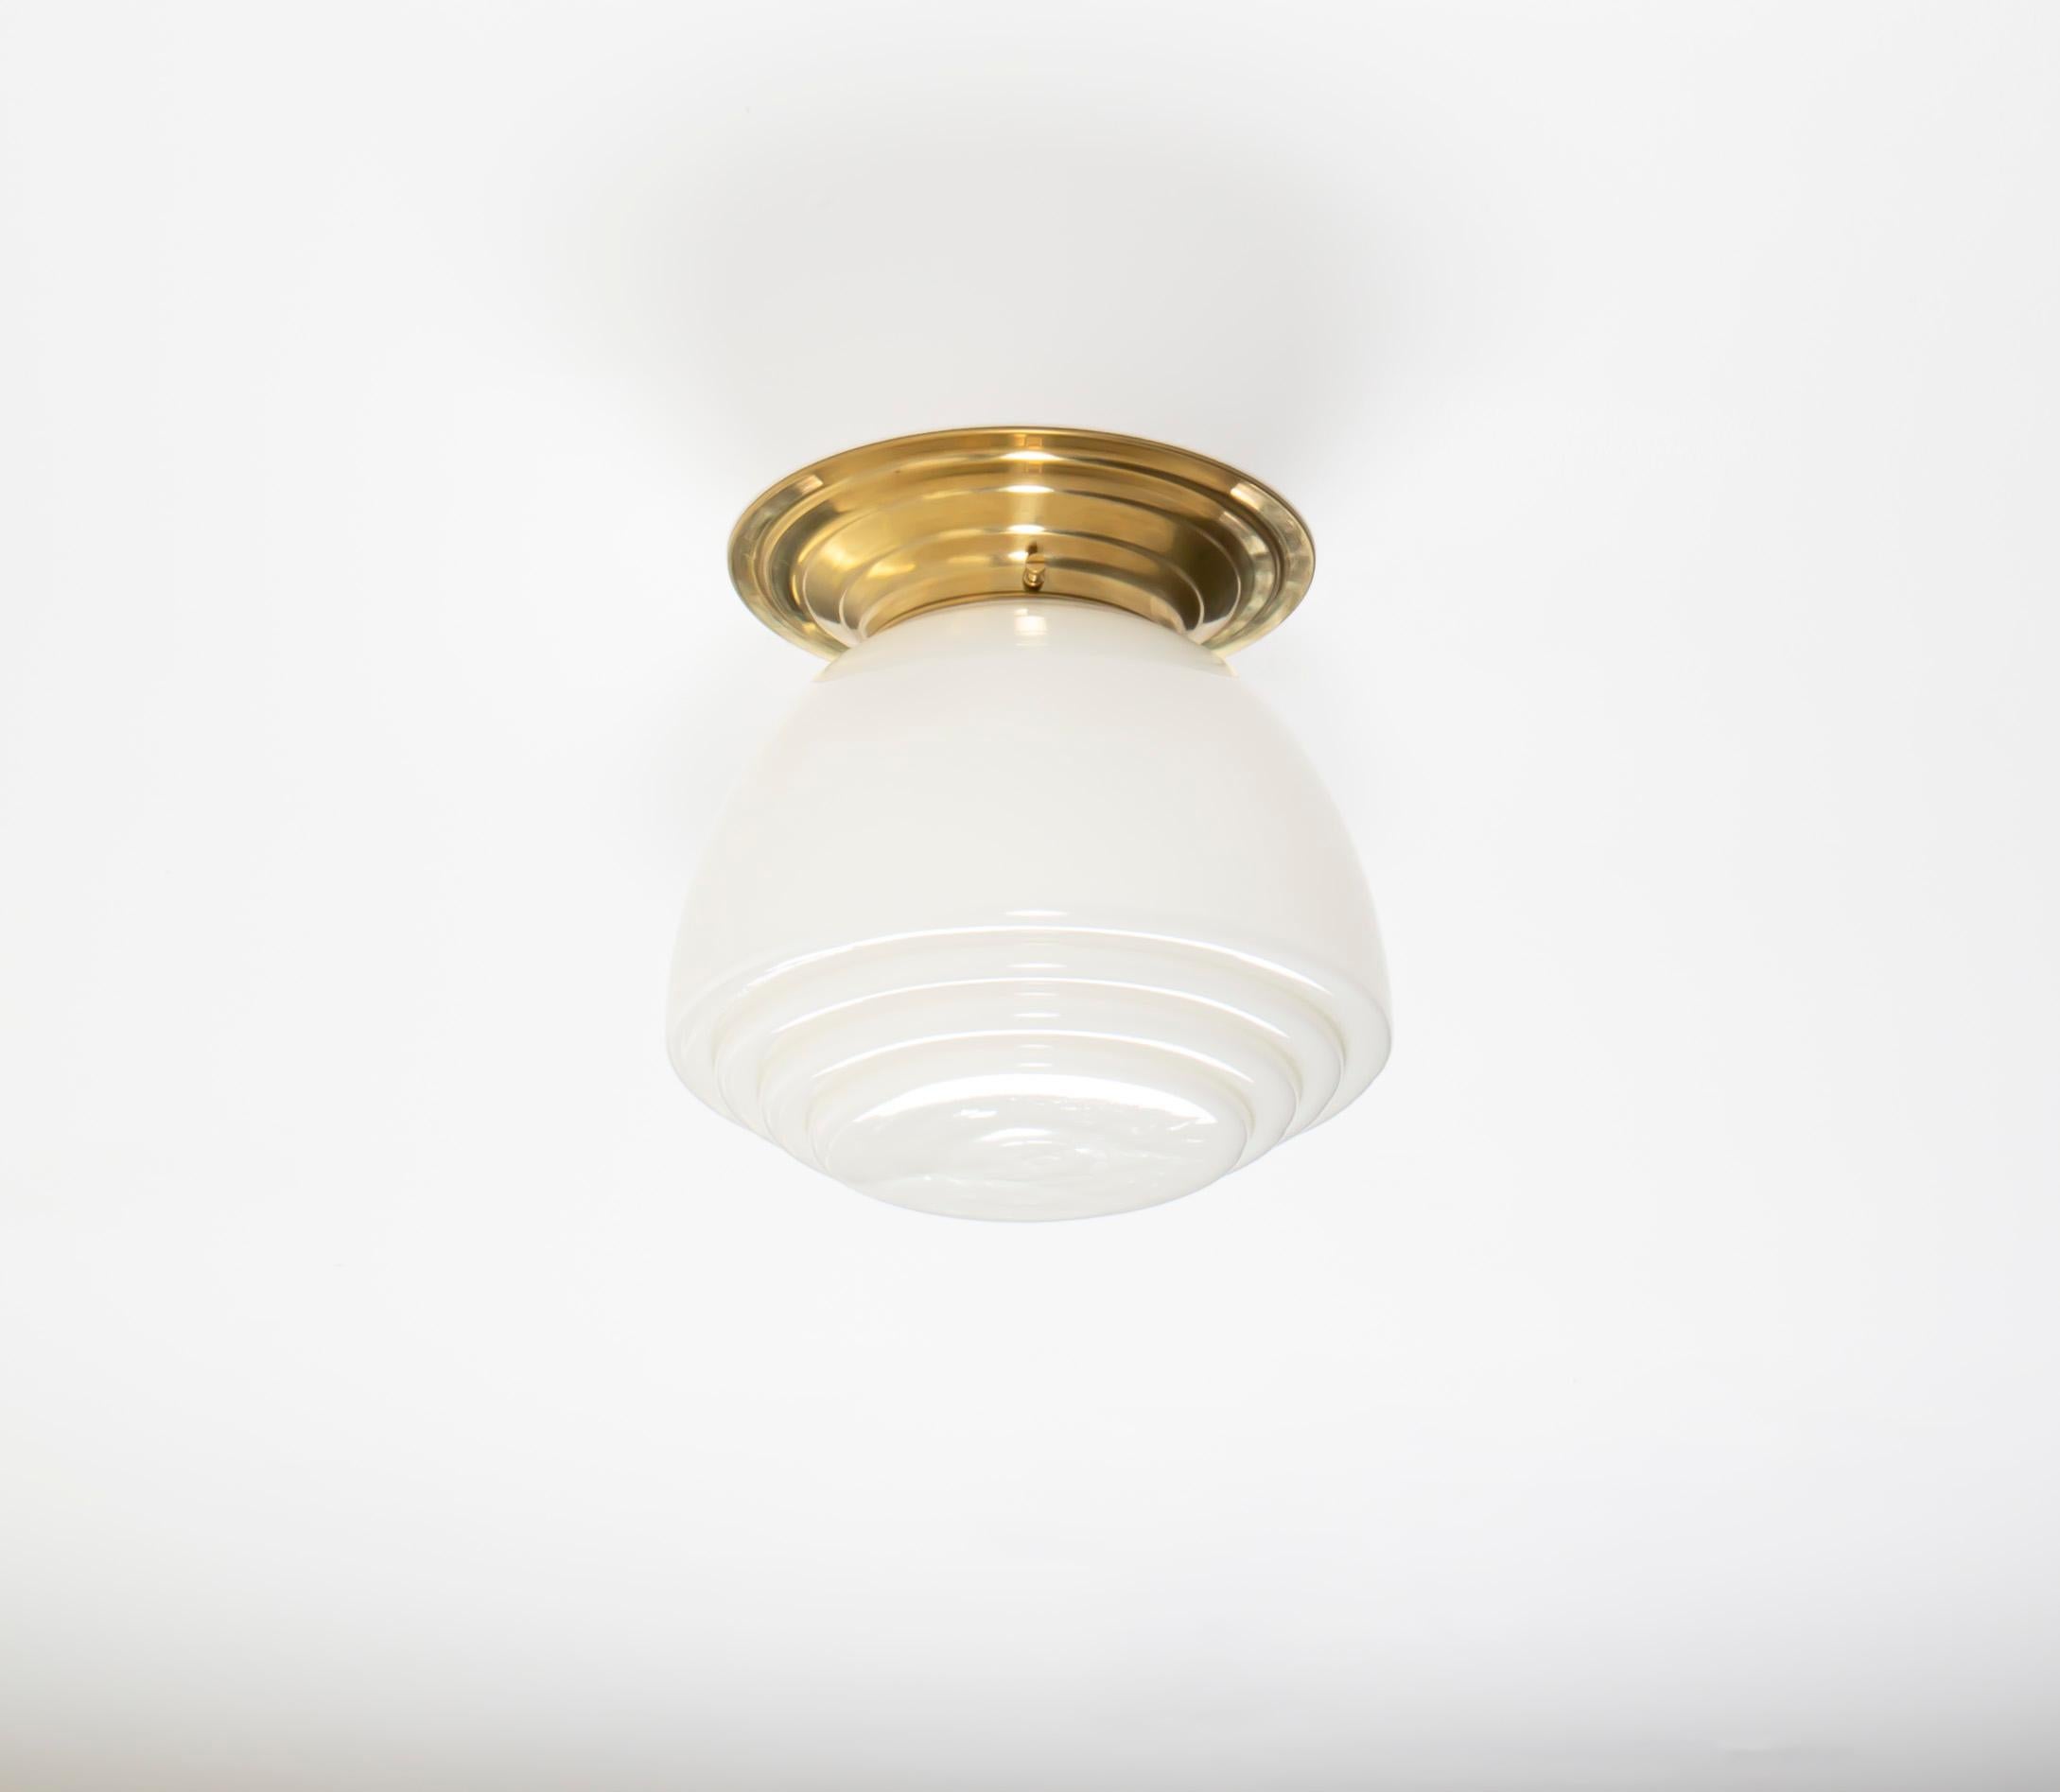 Wonderful ceiling light in with a opaline glass shade and base in brass base. Designed and made in Norway from ca 1950s first half. The lamp is fully working and in very good vintage condition. It is fitted with one E27 bulb holder (works in the US)